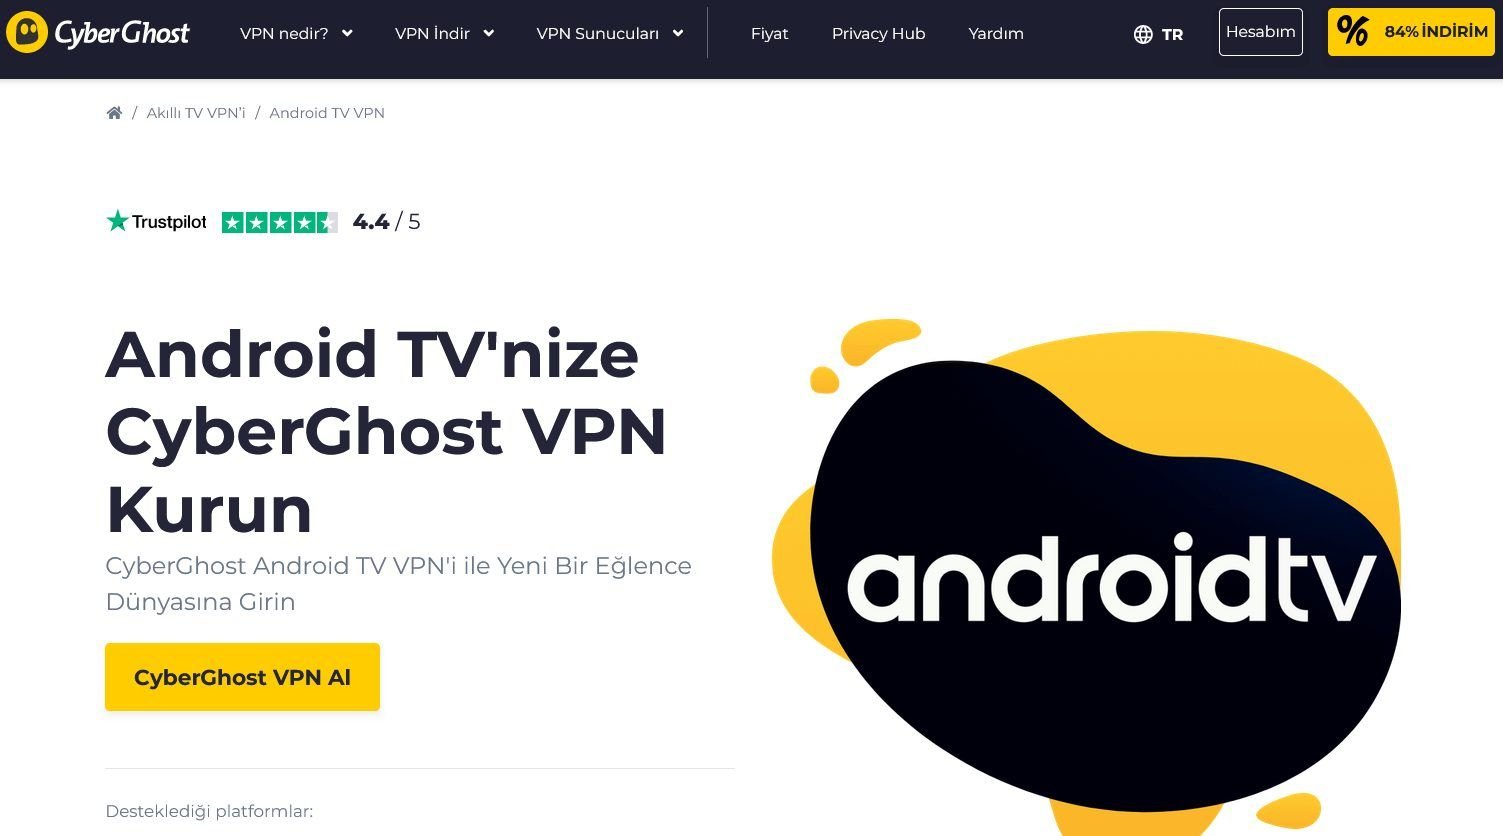 CyberGhost Android TV